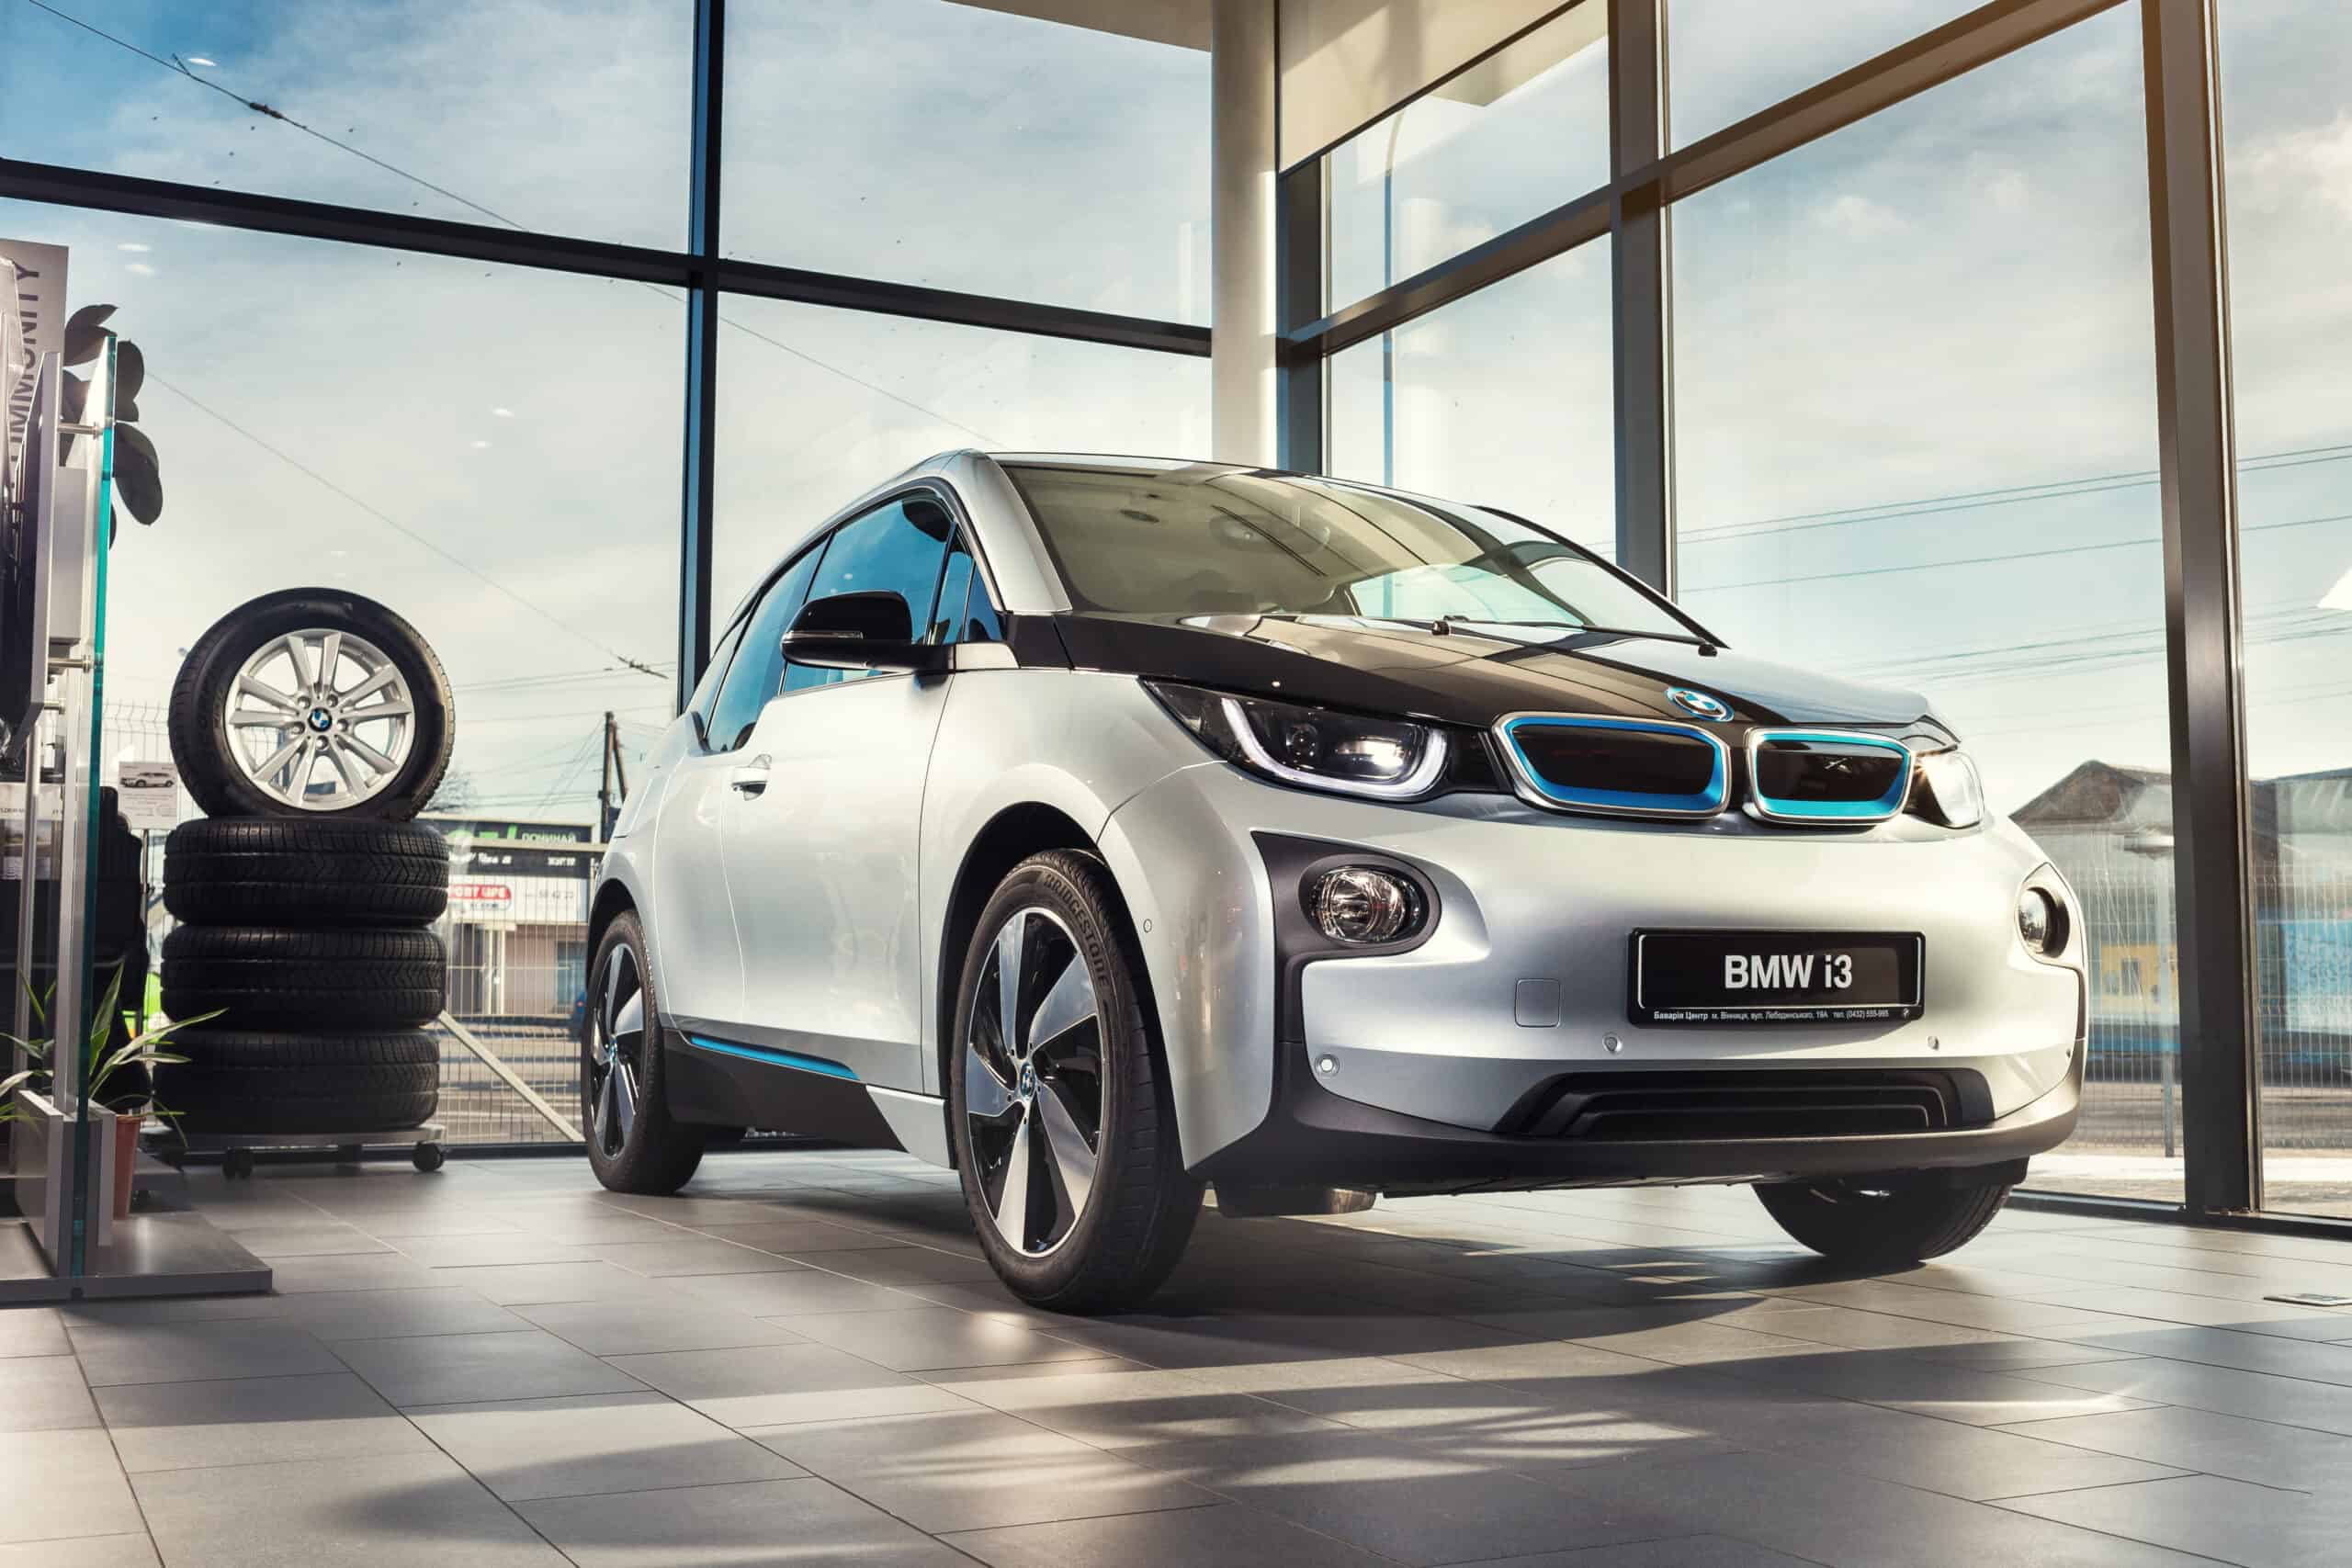 BMW introduces the i3 electric car with optional range-extending